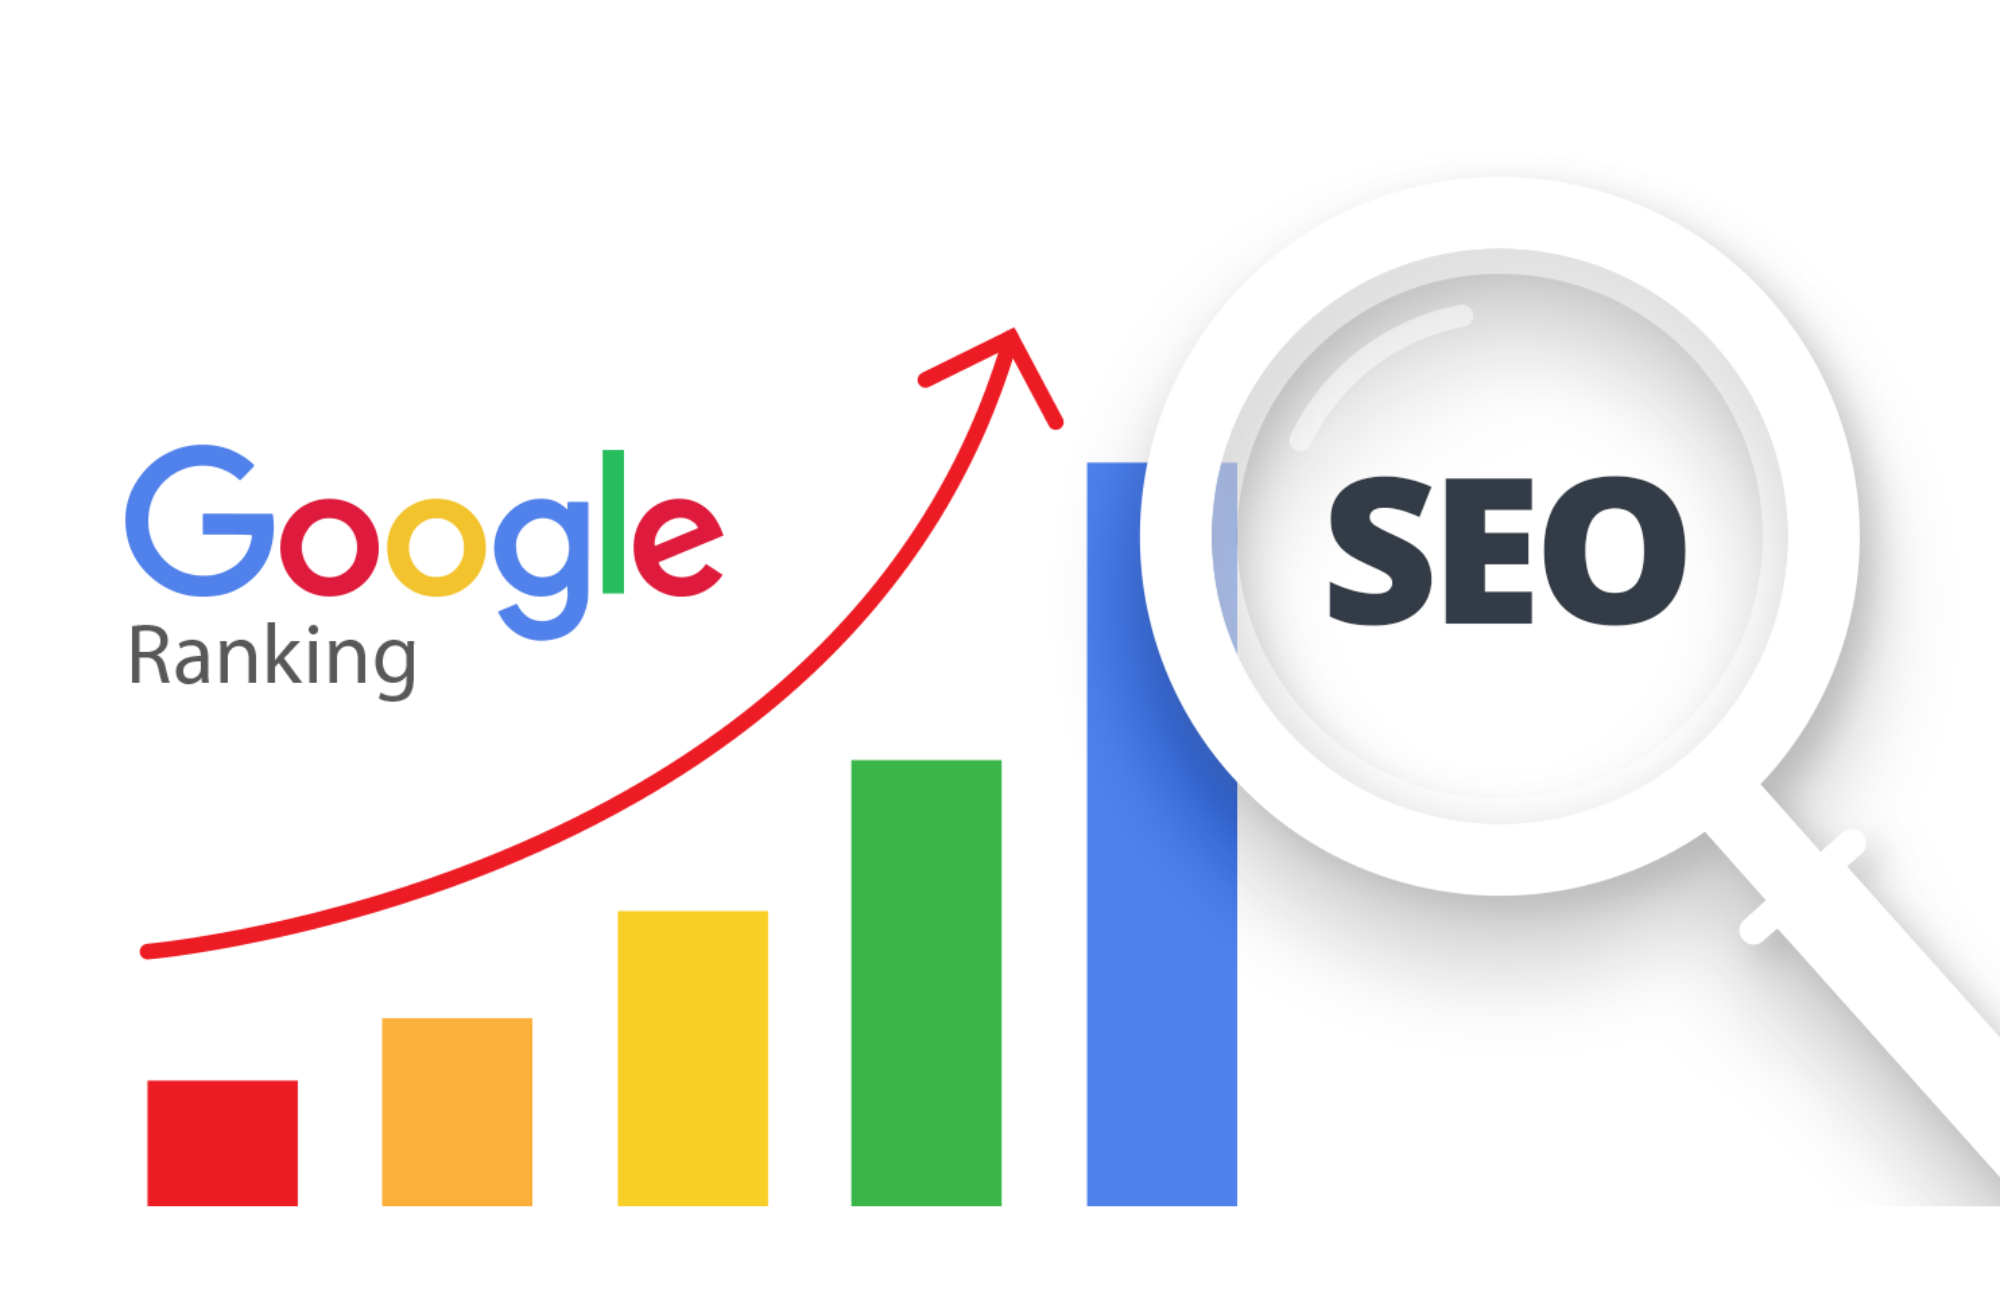 Learn About SEO - Five Things You Should Know If You Want To Rank In SEO